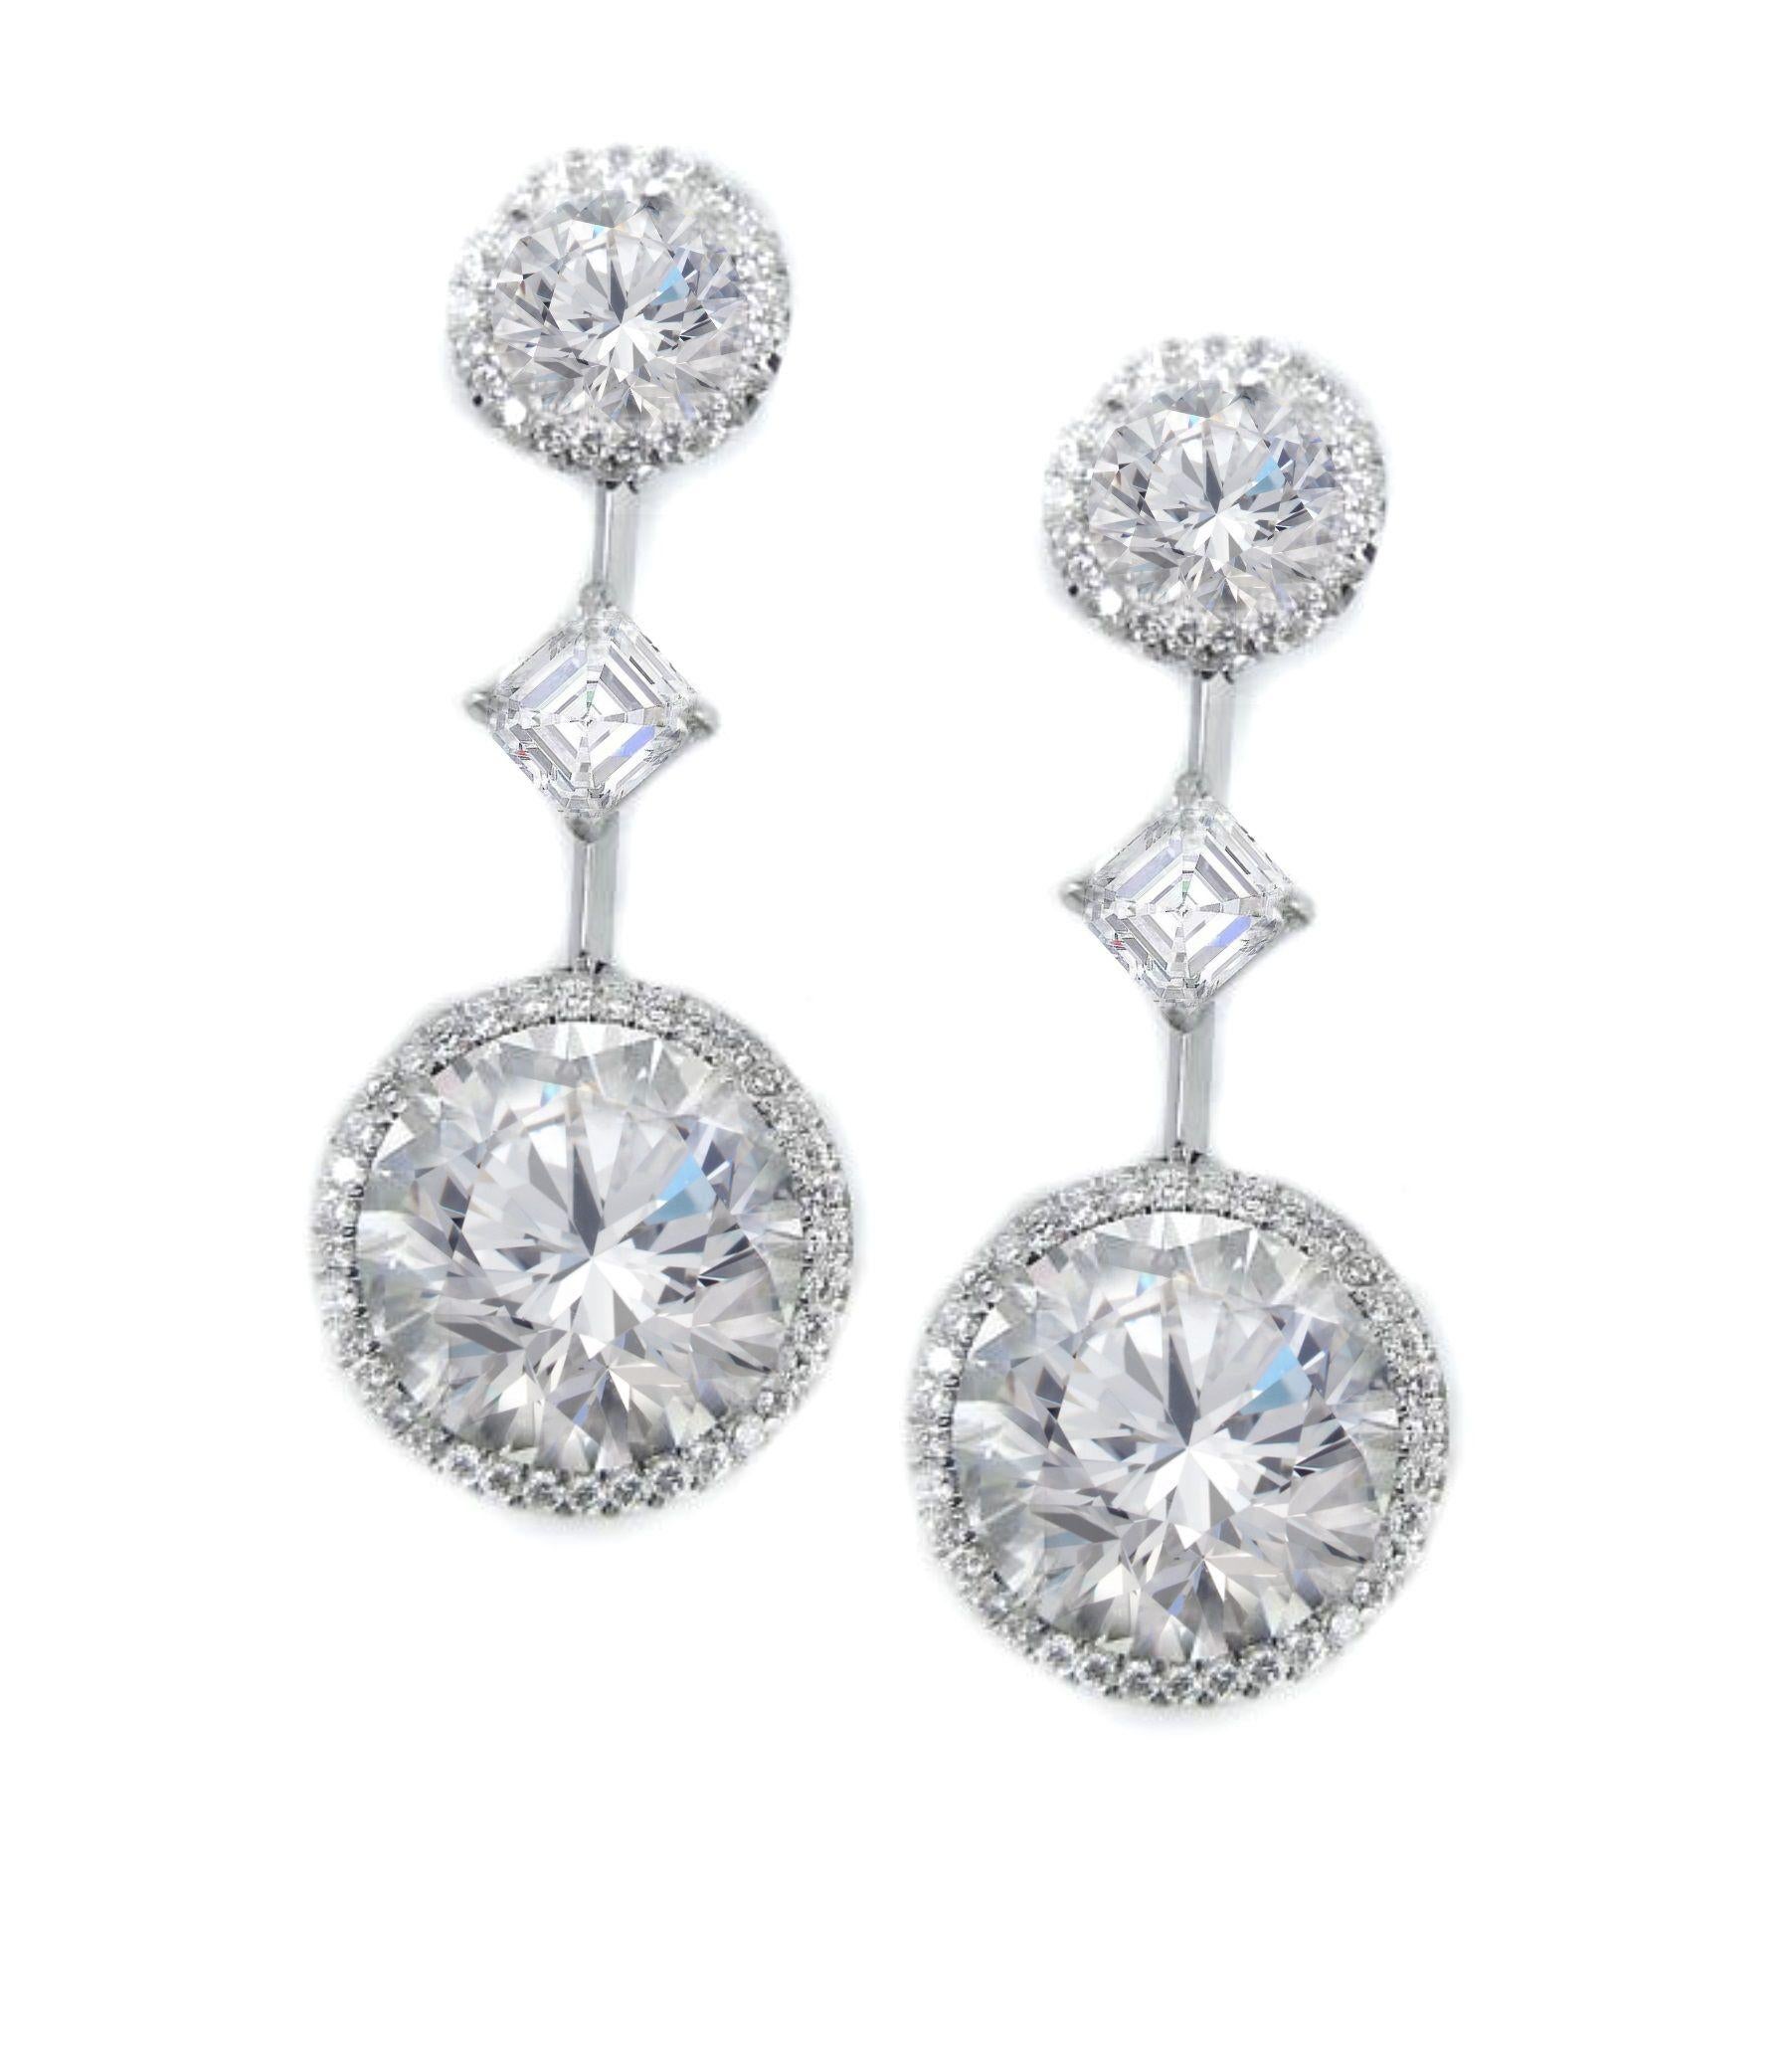 Round Cut GIA Certified 19.19 Carat Important Diamond Earrings For Sale